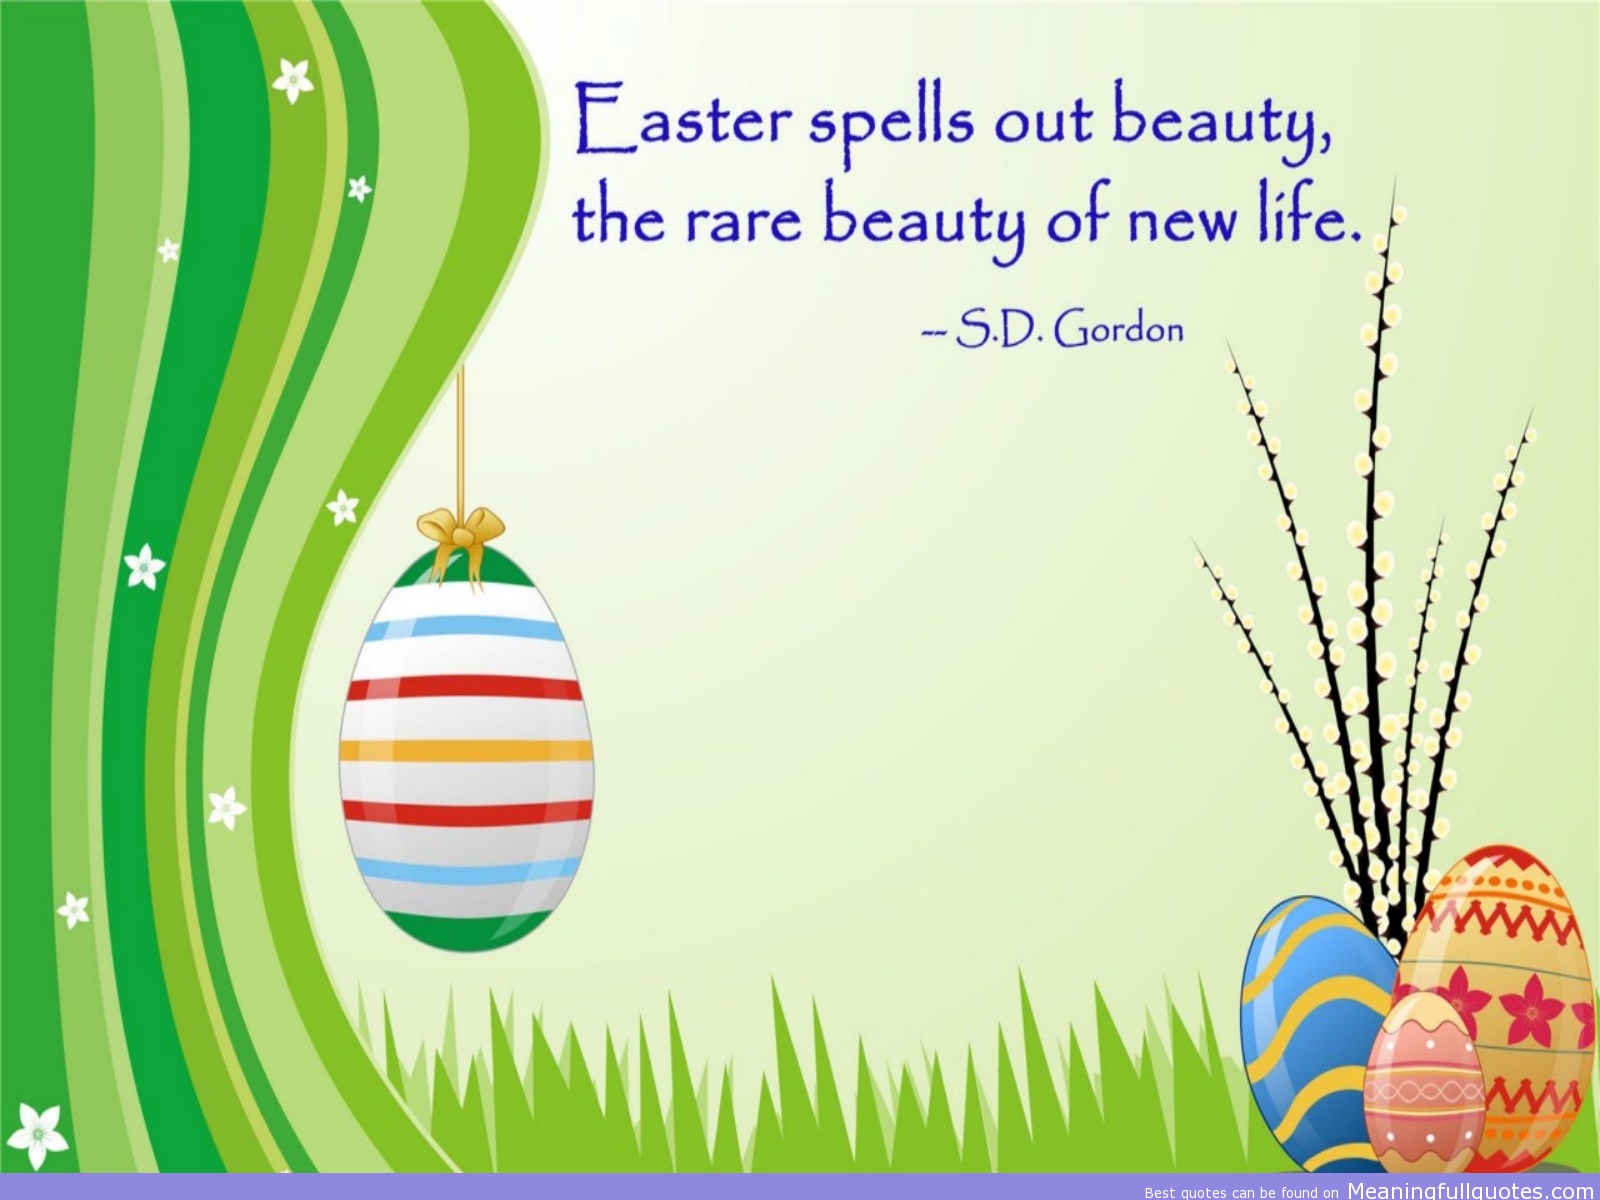 Inspirational Easter Quotes & Sayings with Images